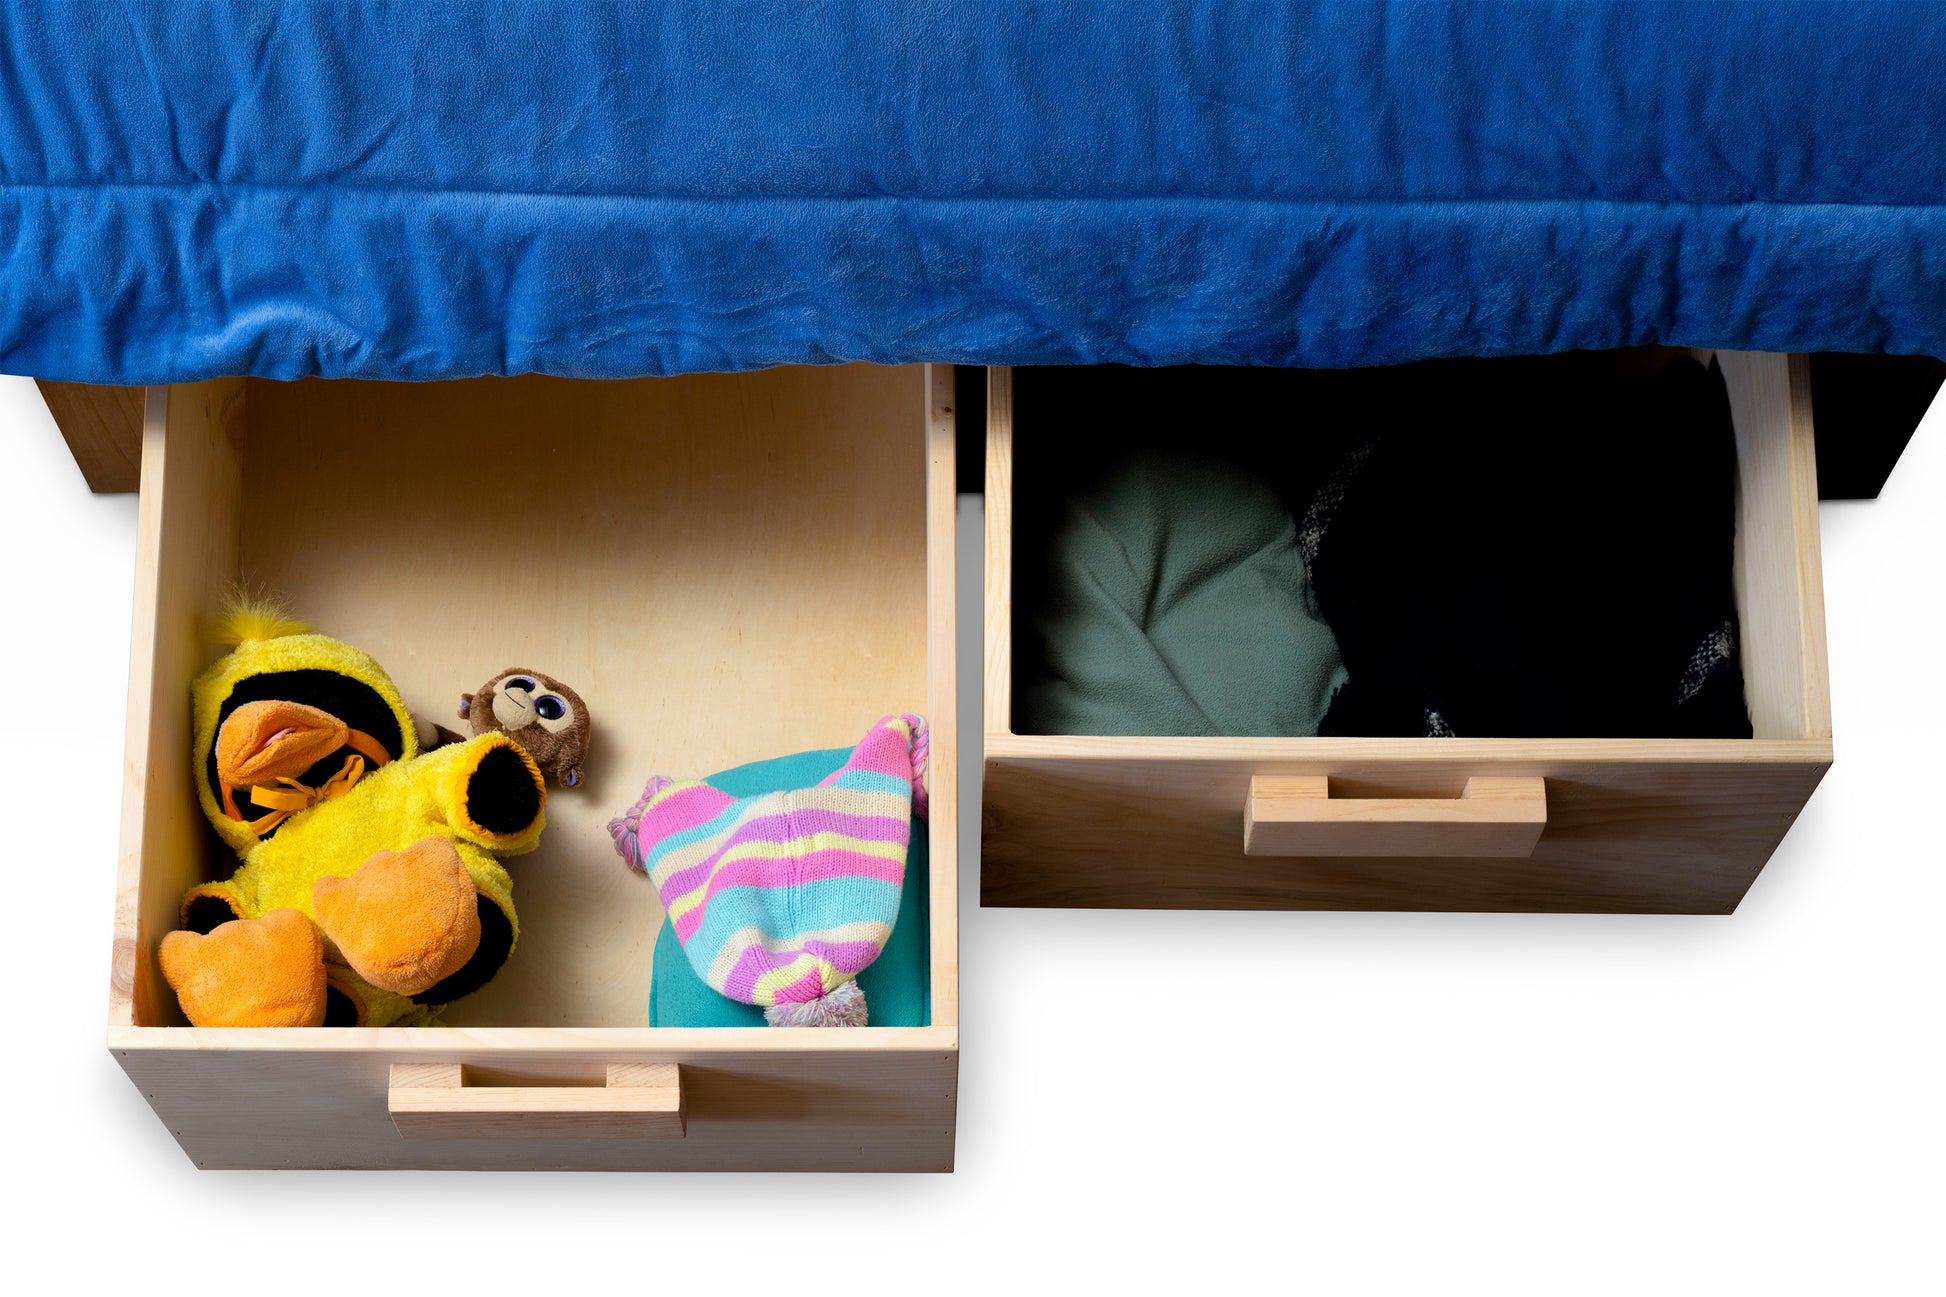 Two Evergreen Under Bed Drawers shown with items to give example to storage space available.